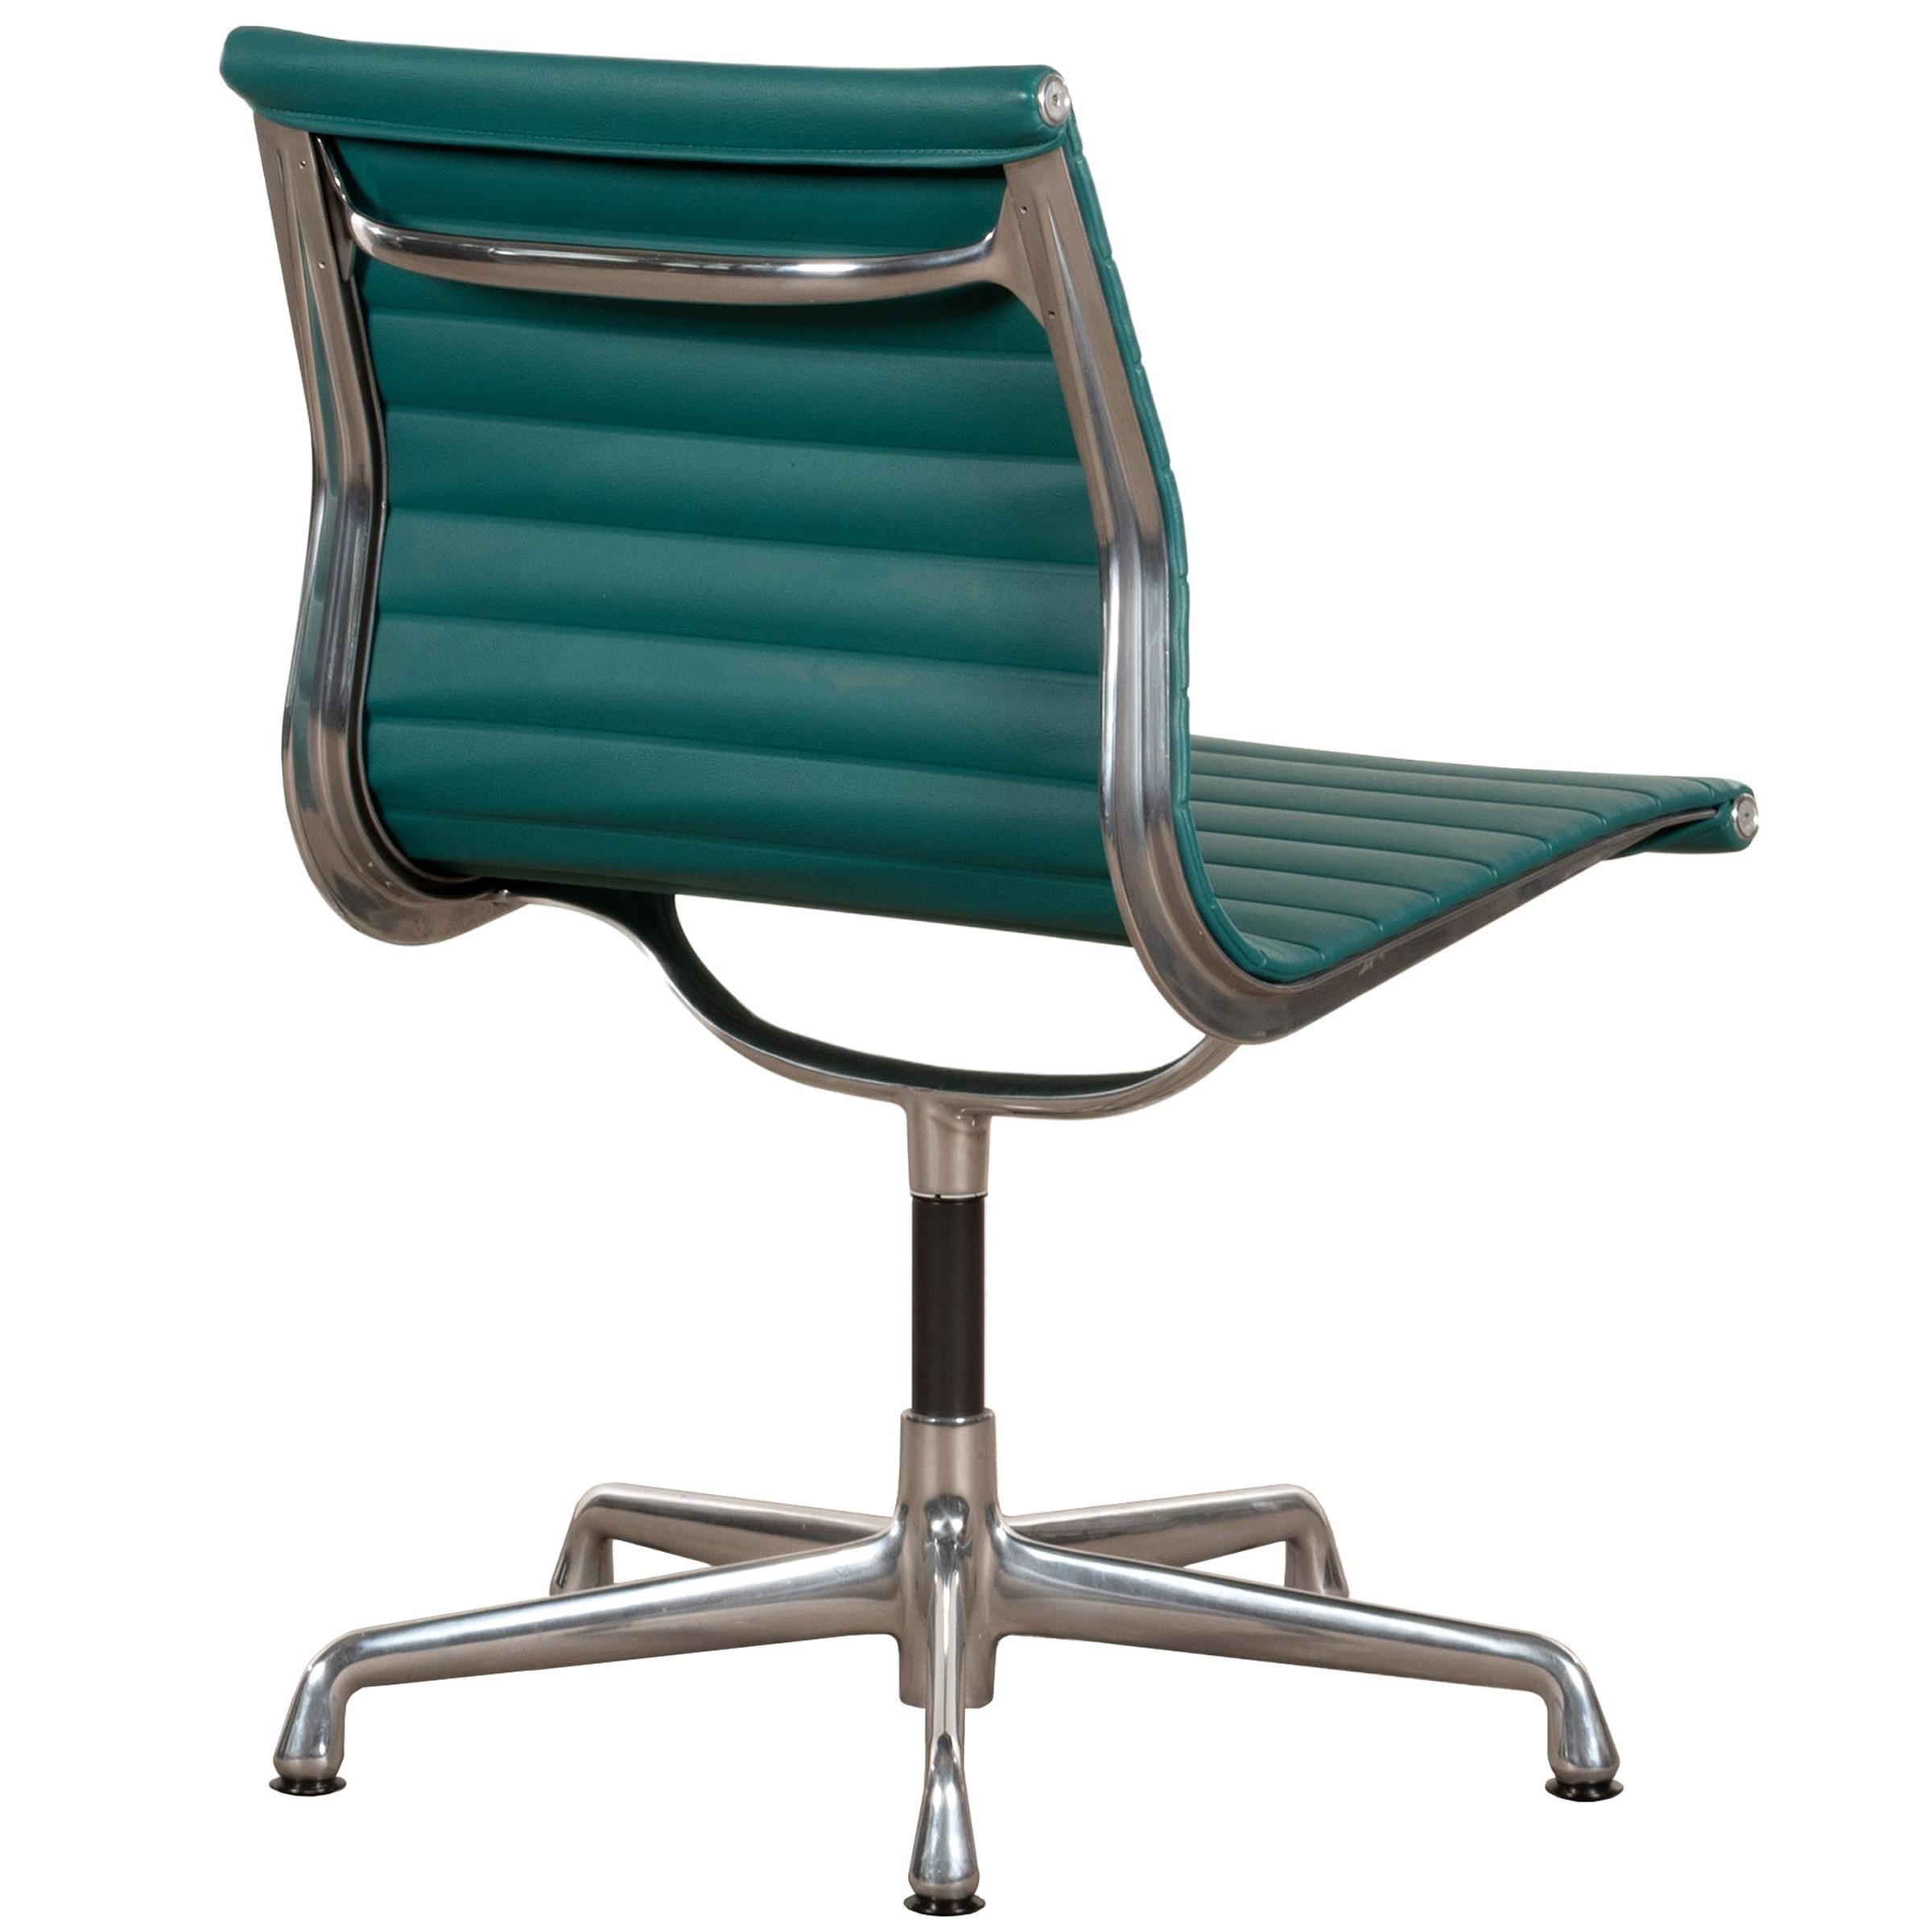 Eames Conference Chair in Turquoise Vinyl for Herman Miller, USA